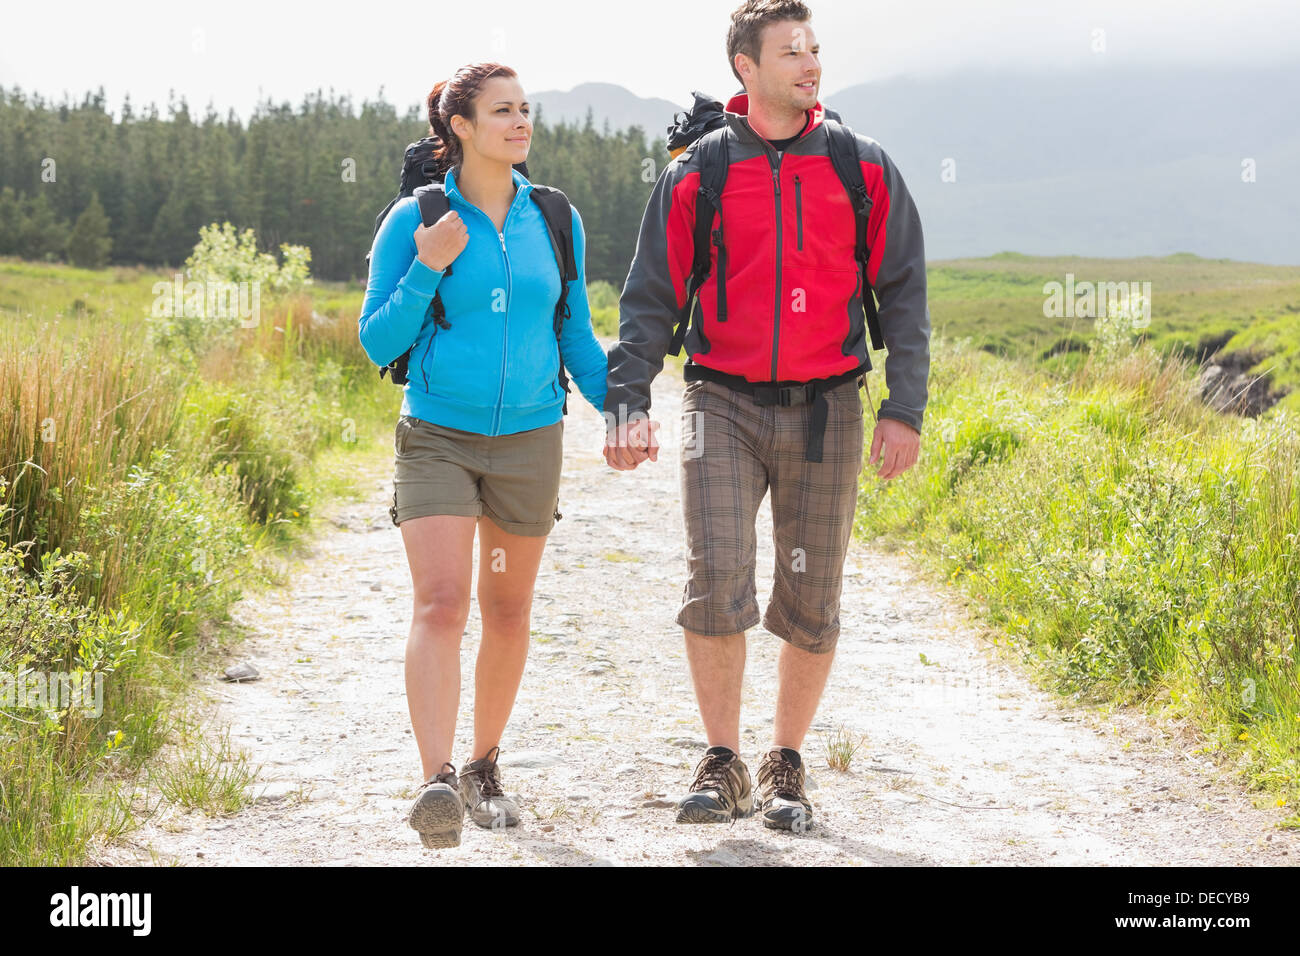 Hikers with backpacks holding hands and walking Stock Photo